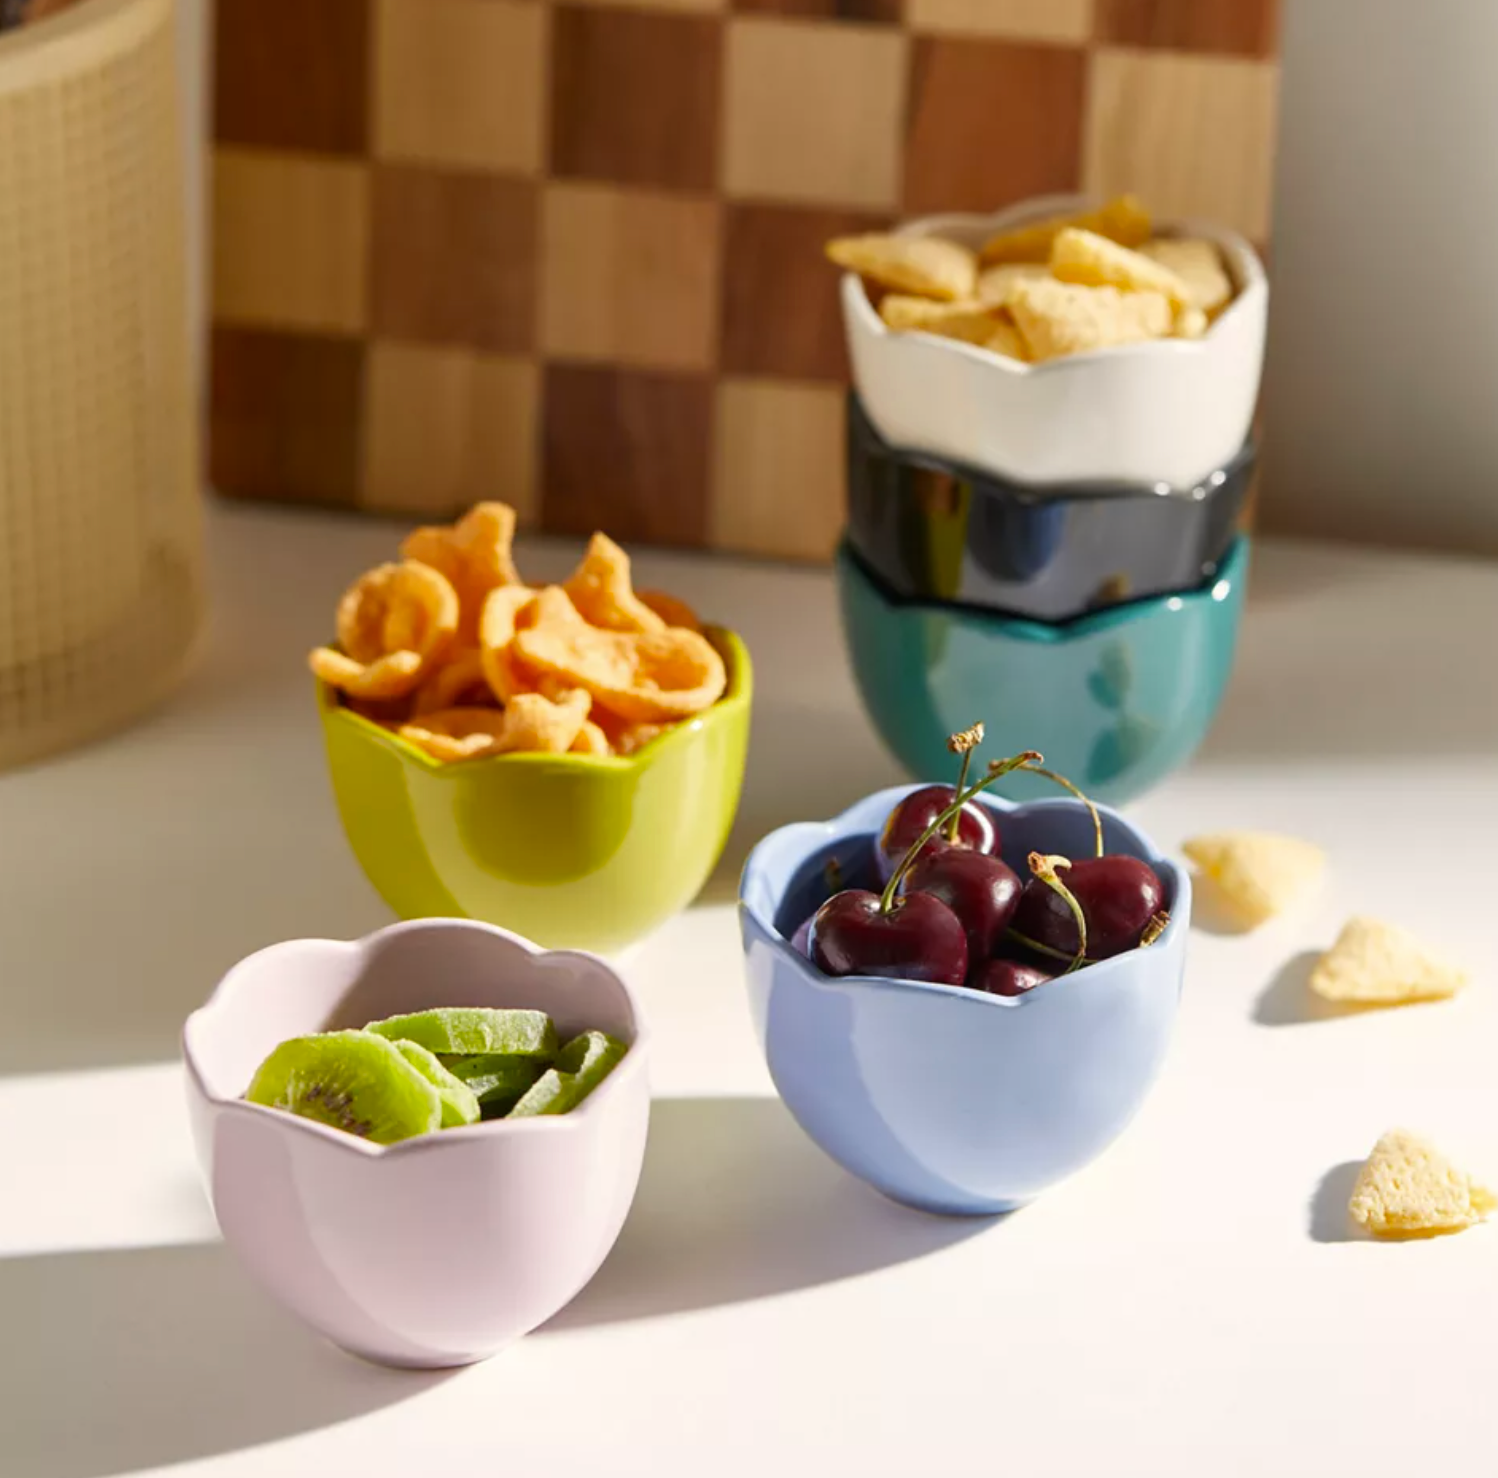 Six pinch bowls on a counter, three with fruit and snacks in them